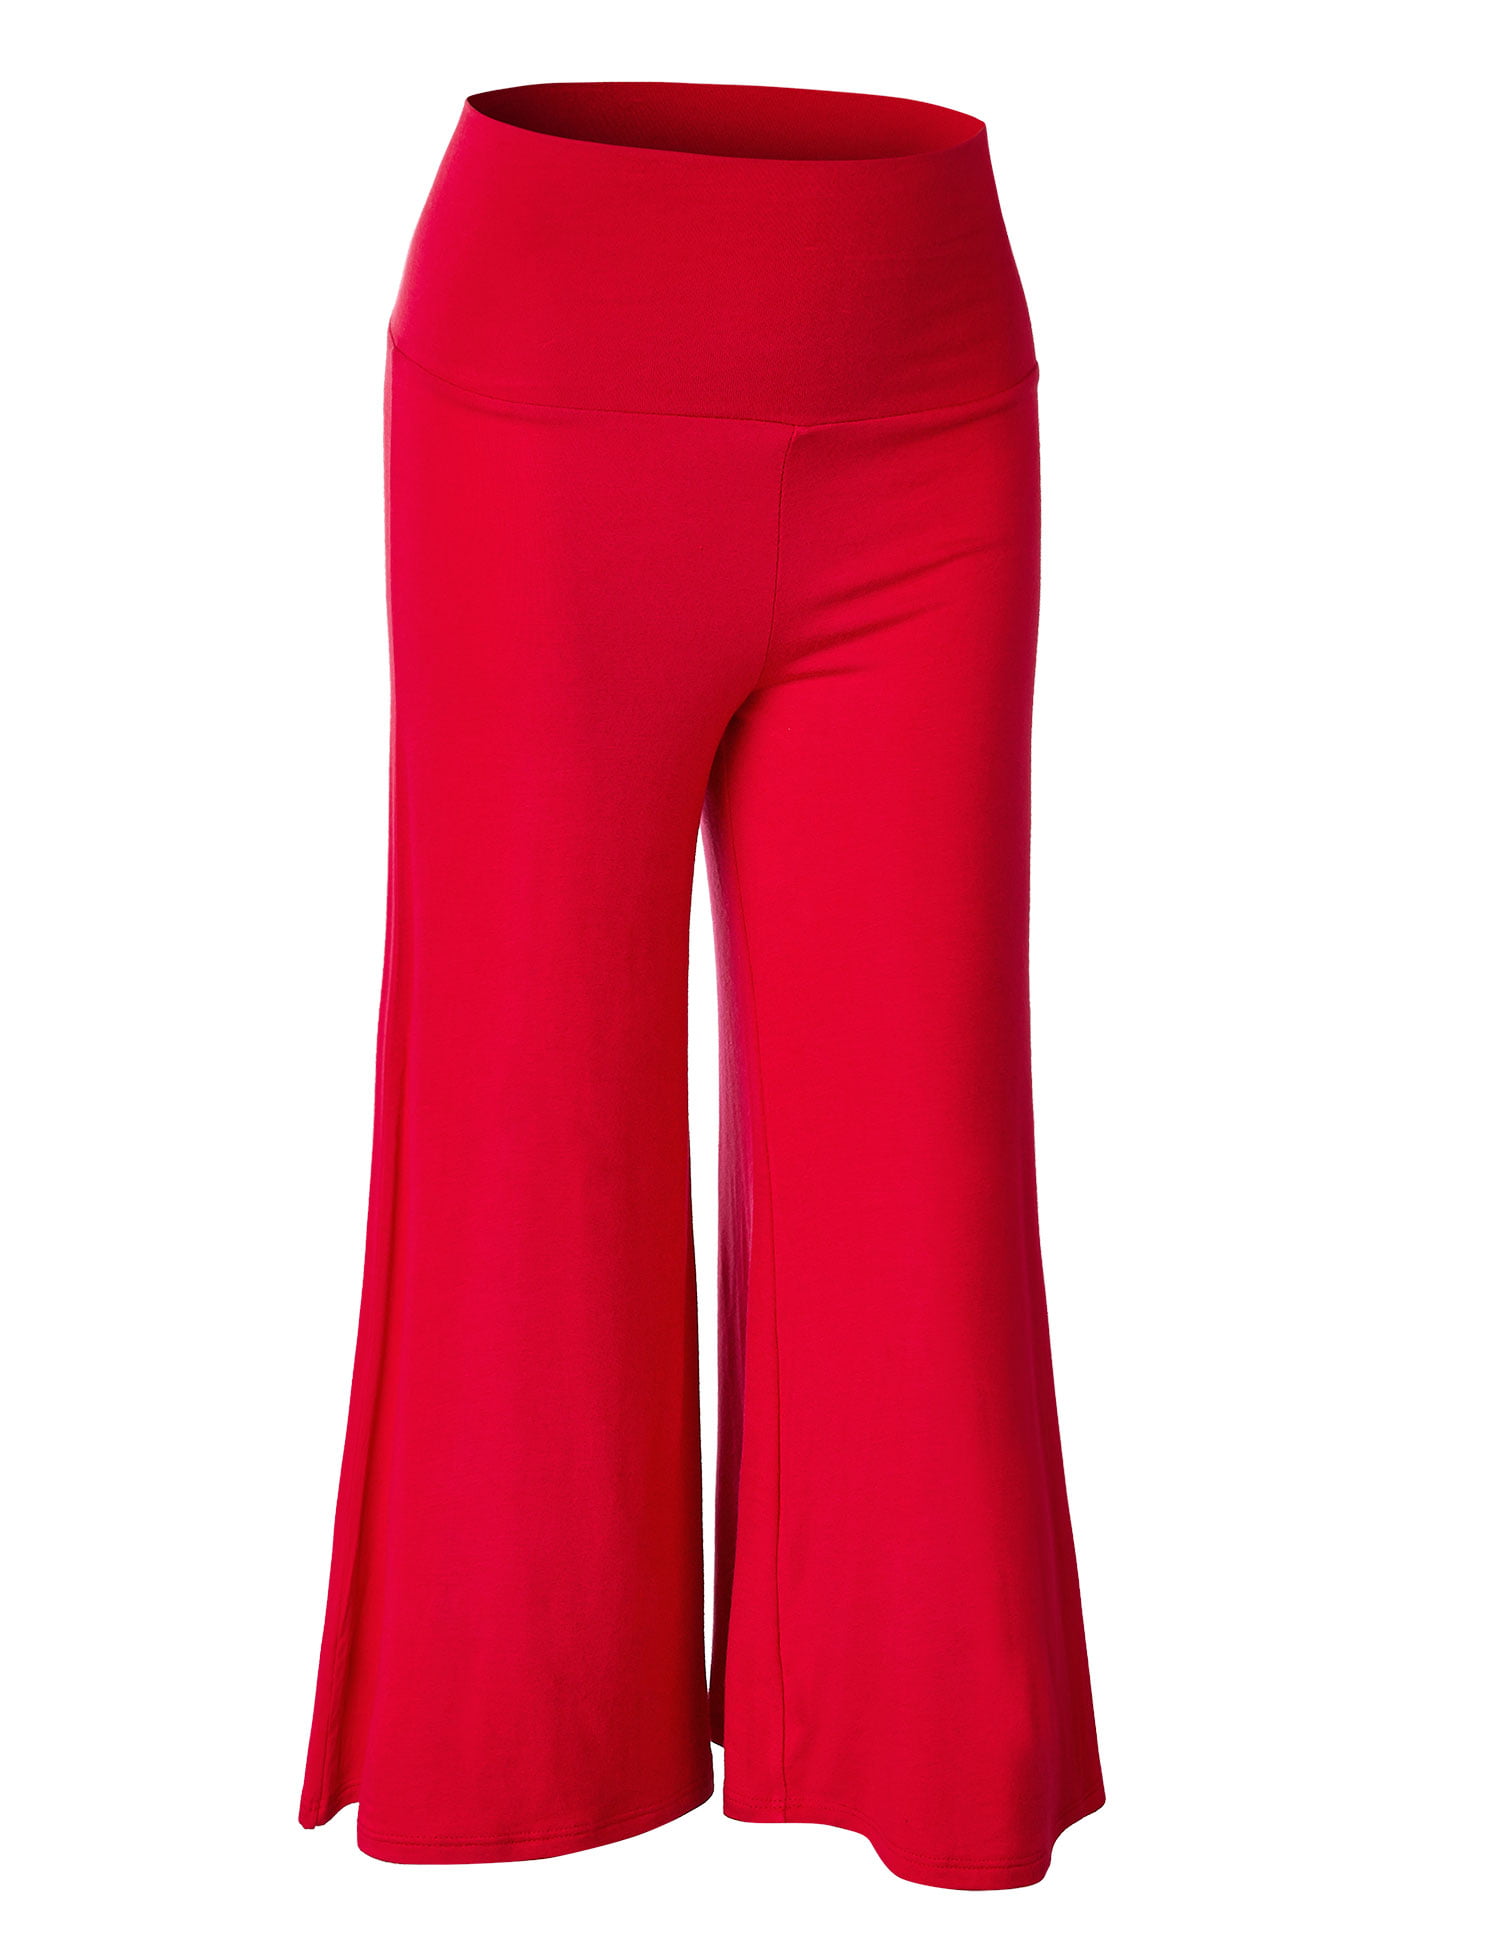 Pants by Culottes Women\'s L RED Knit Johnny Made